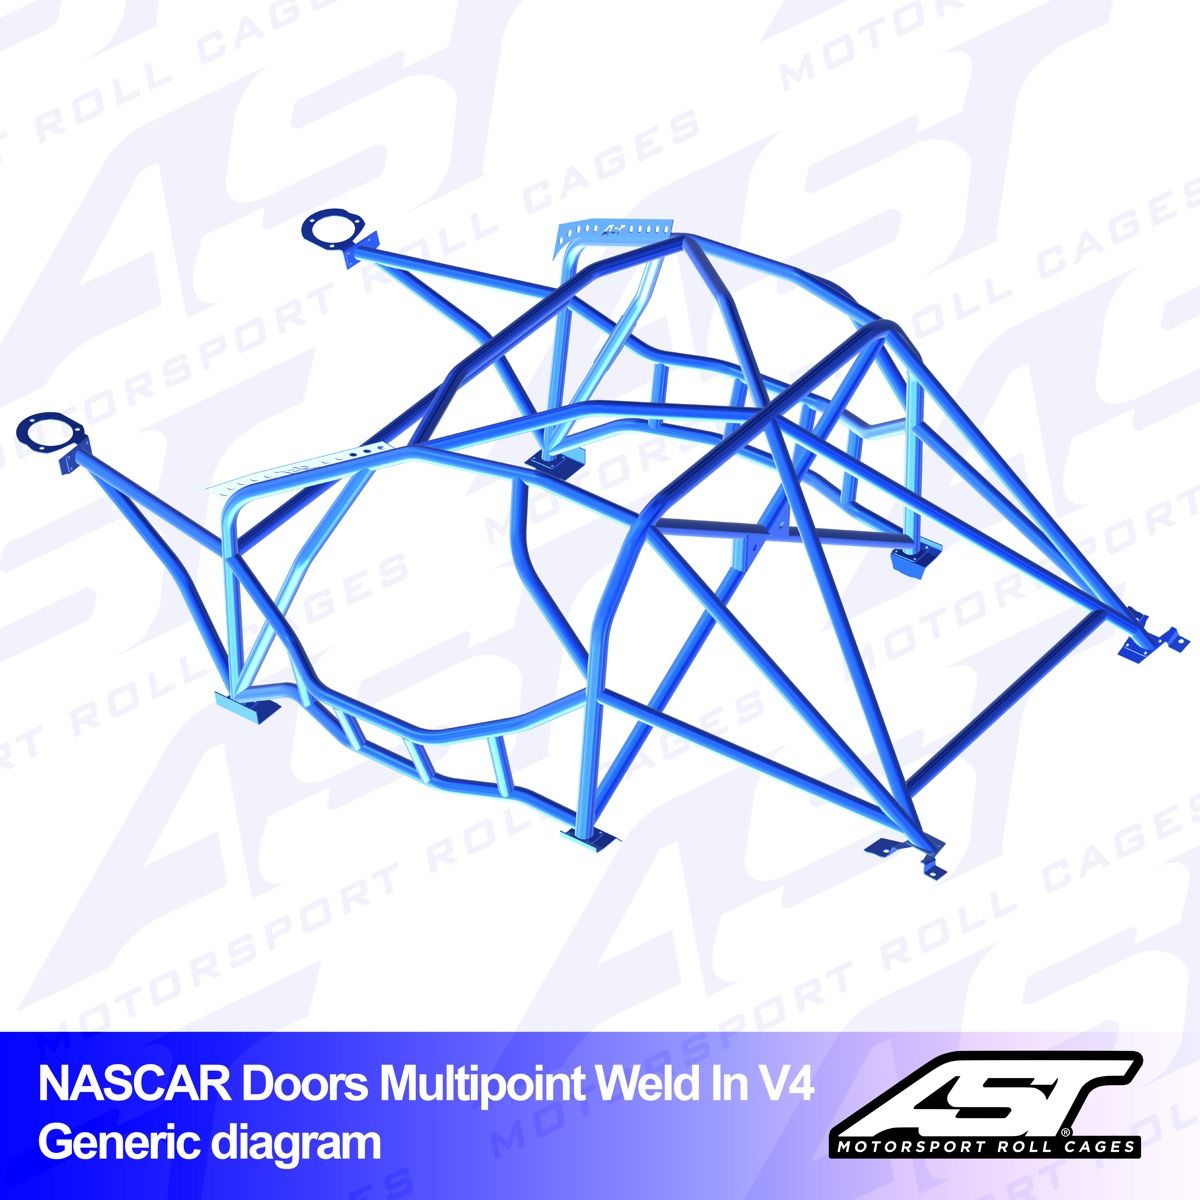 Roll Cage BMW (E36) 3-Series 2-doors Coupe RWD MULTIPOINT WELD IN V4 NASCAR-door for drift